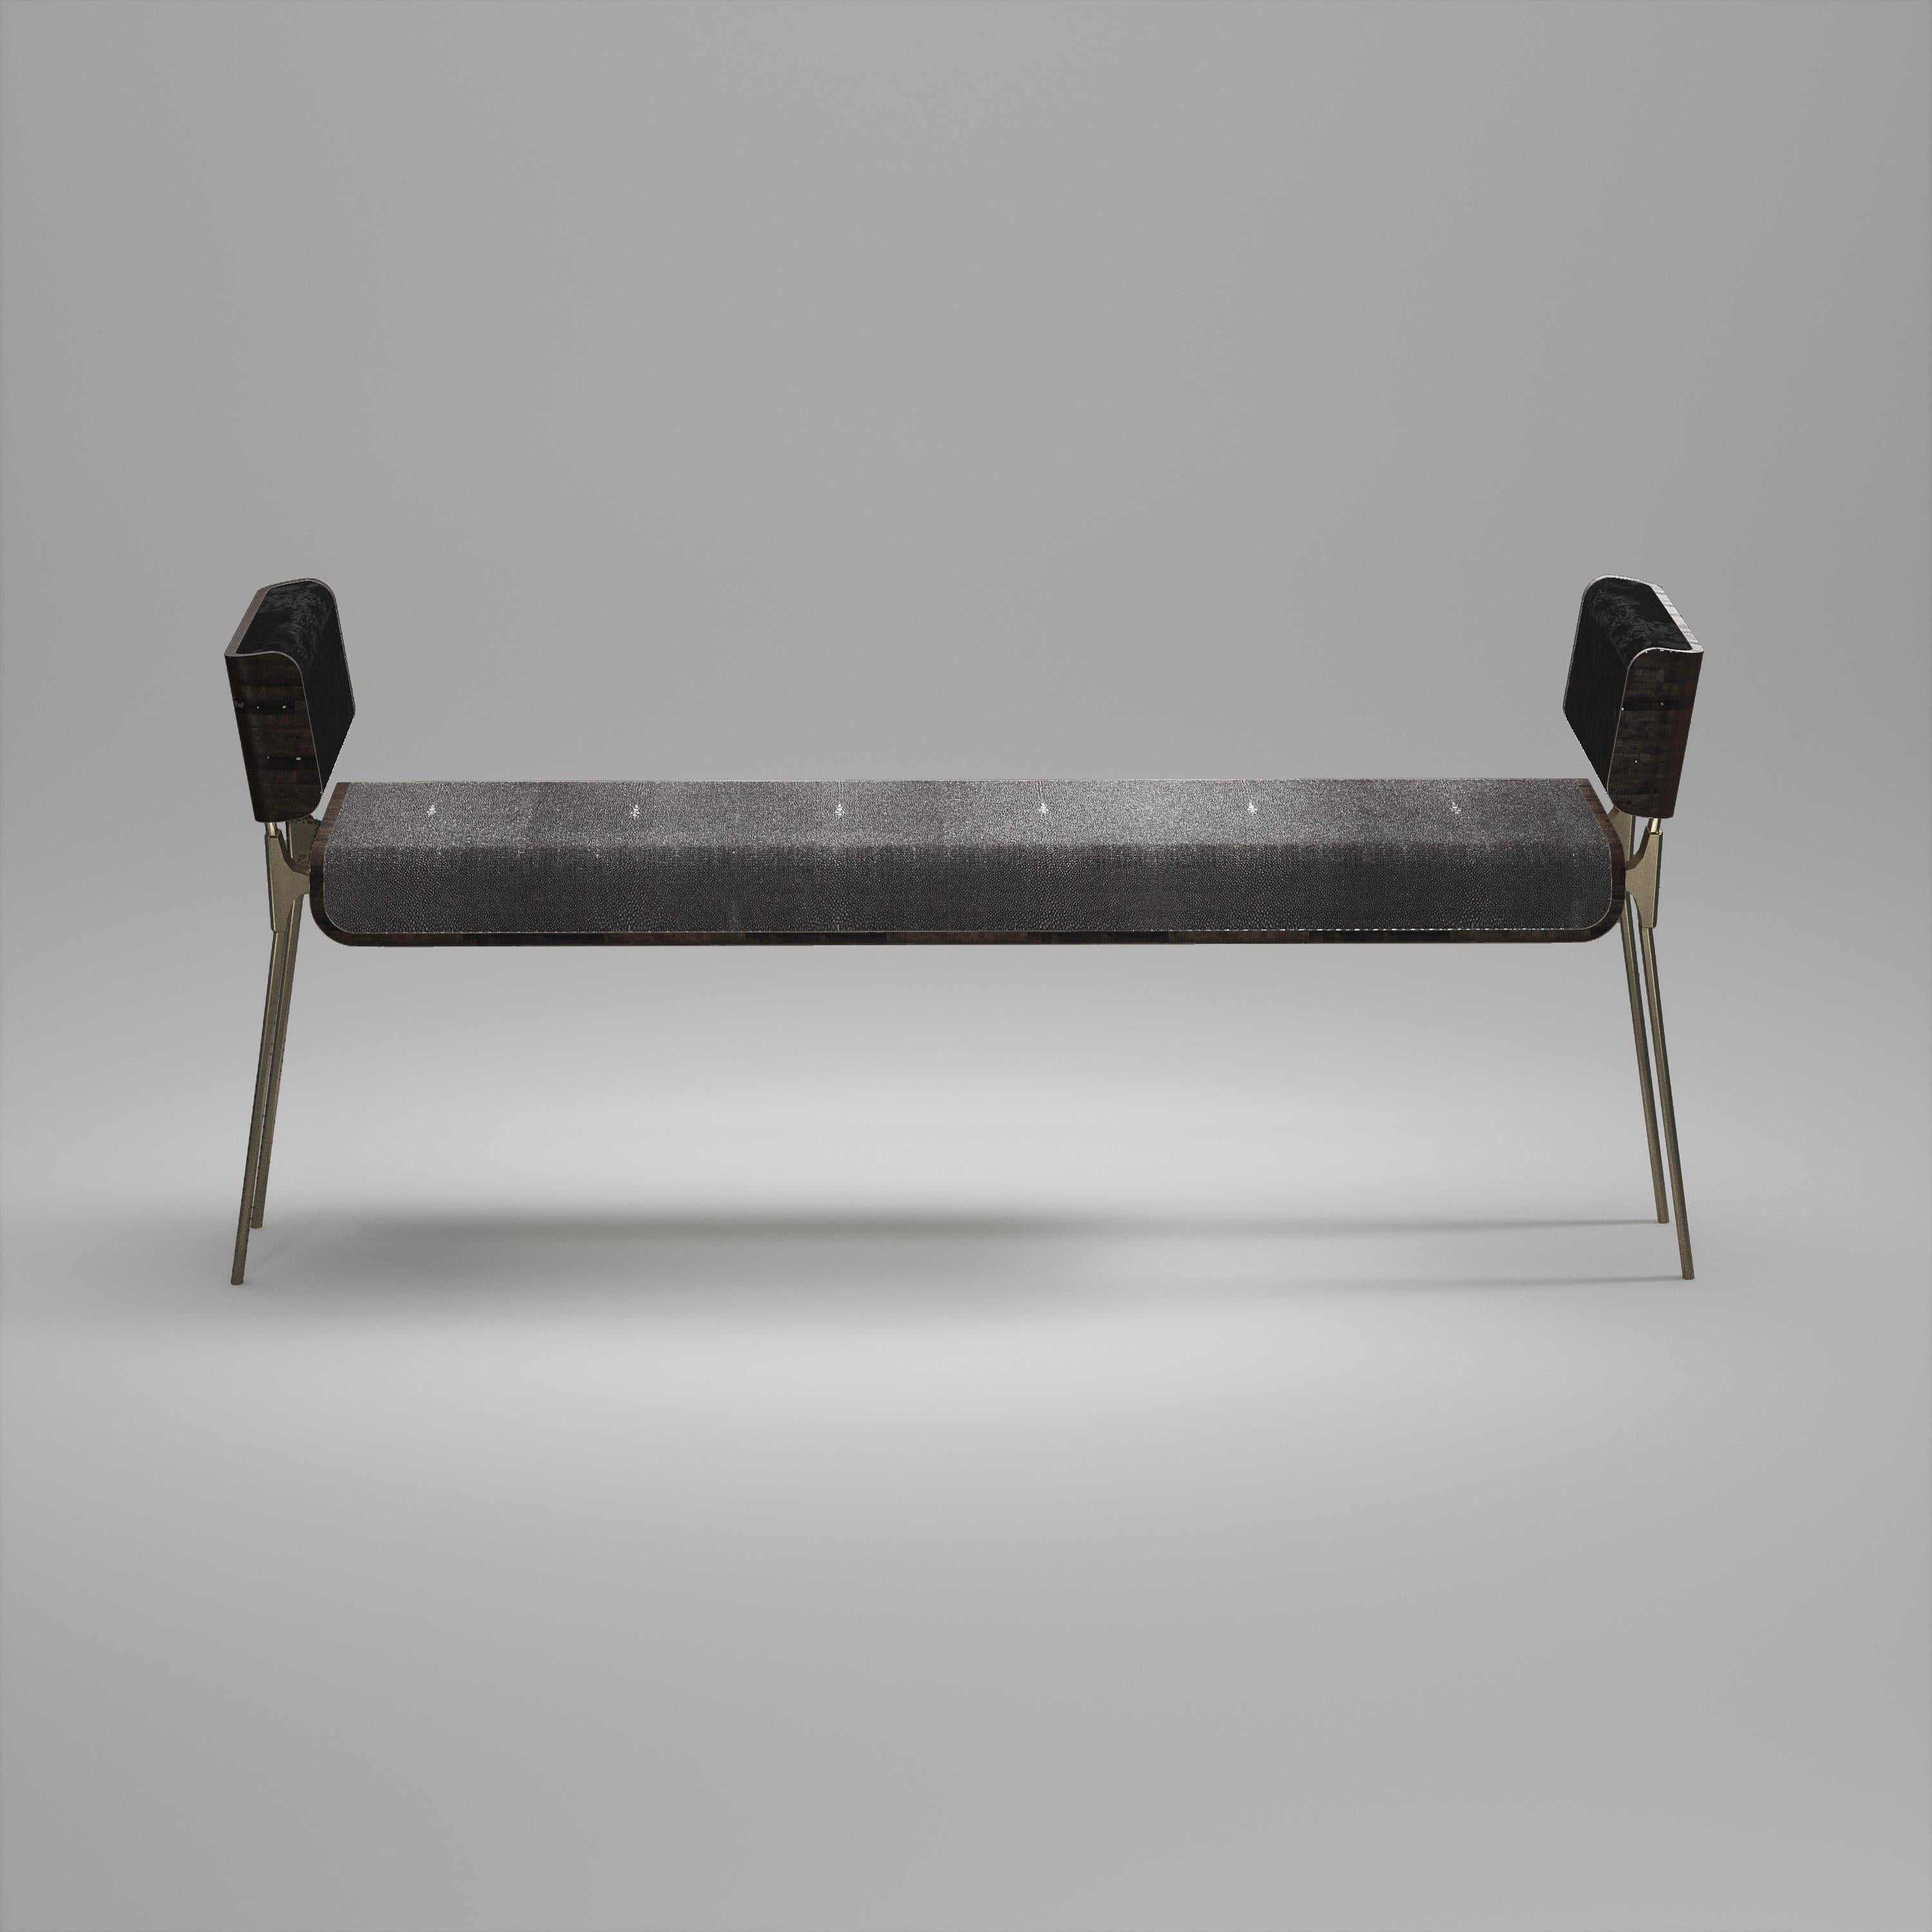 Art Deco Shagreen Bench with Palmwood and Bronze-Patina Brass Details by Kifu Paris For Sale